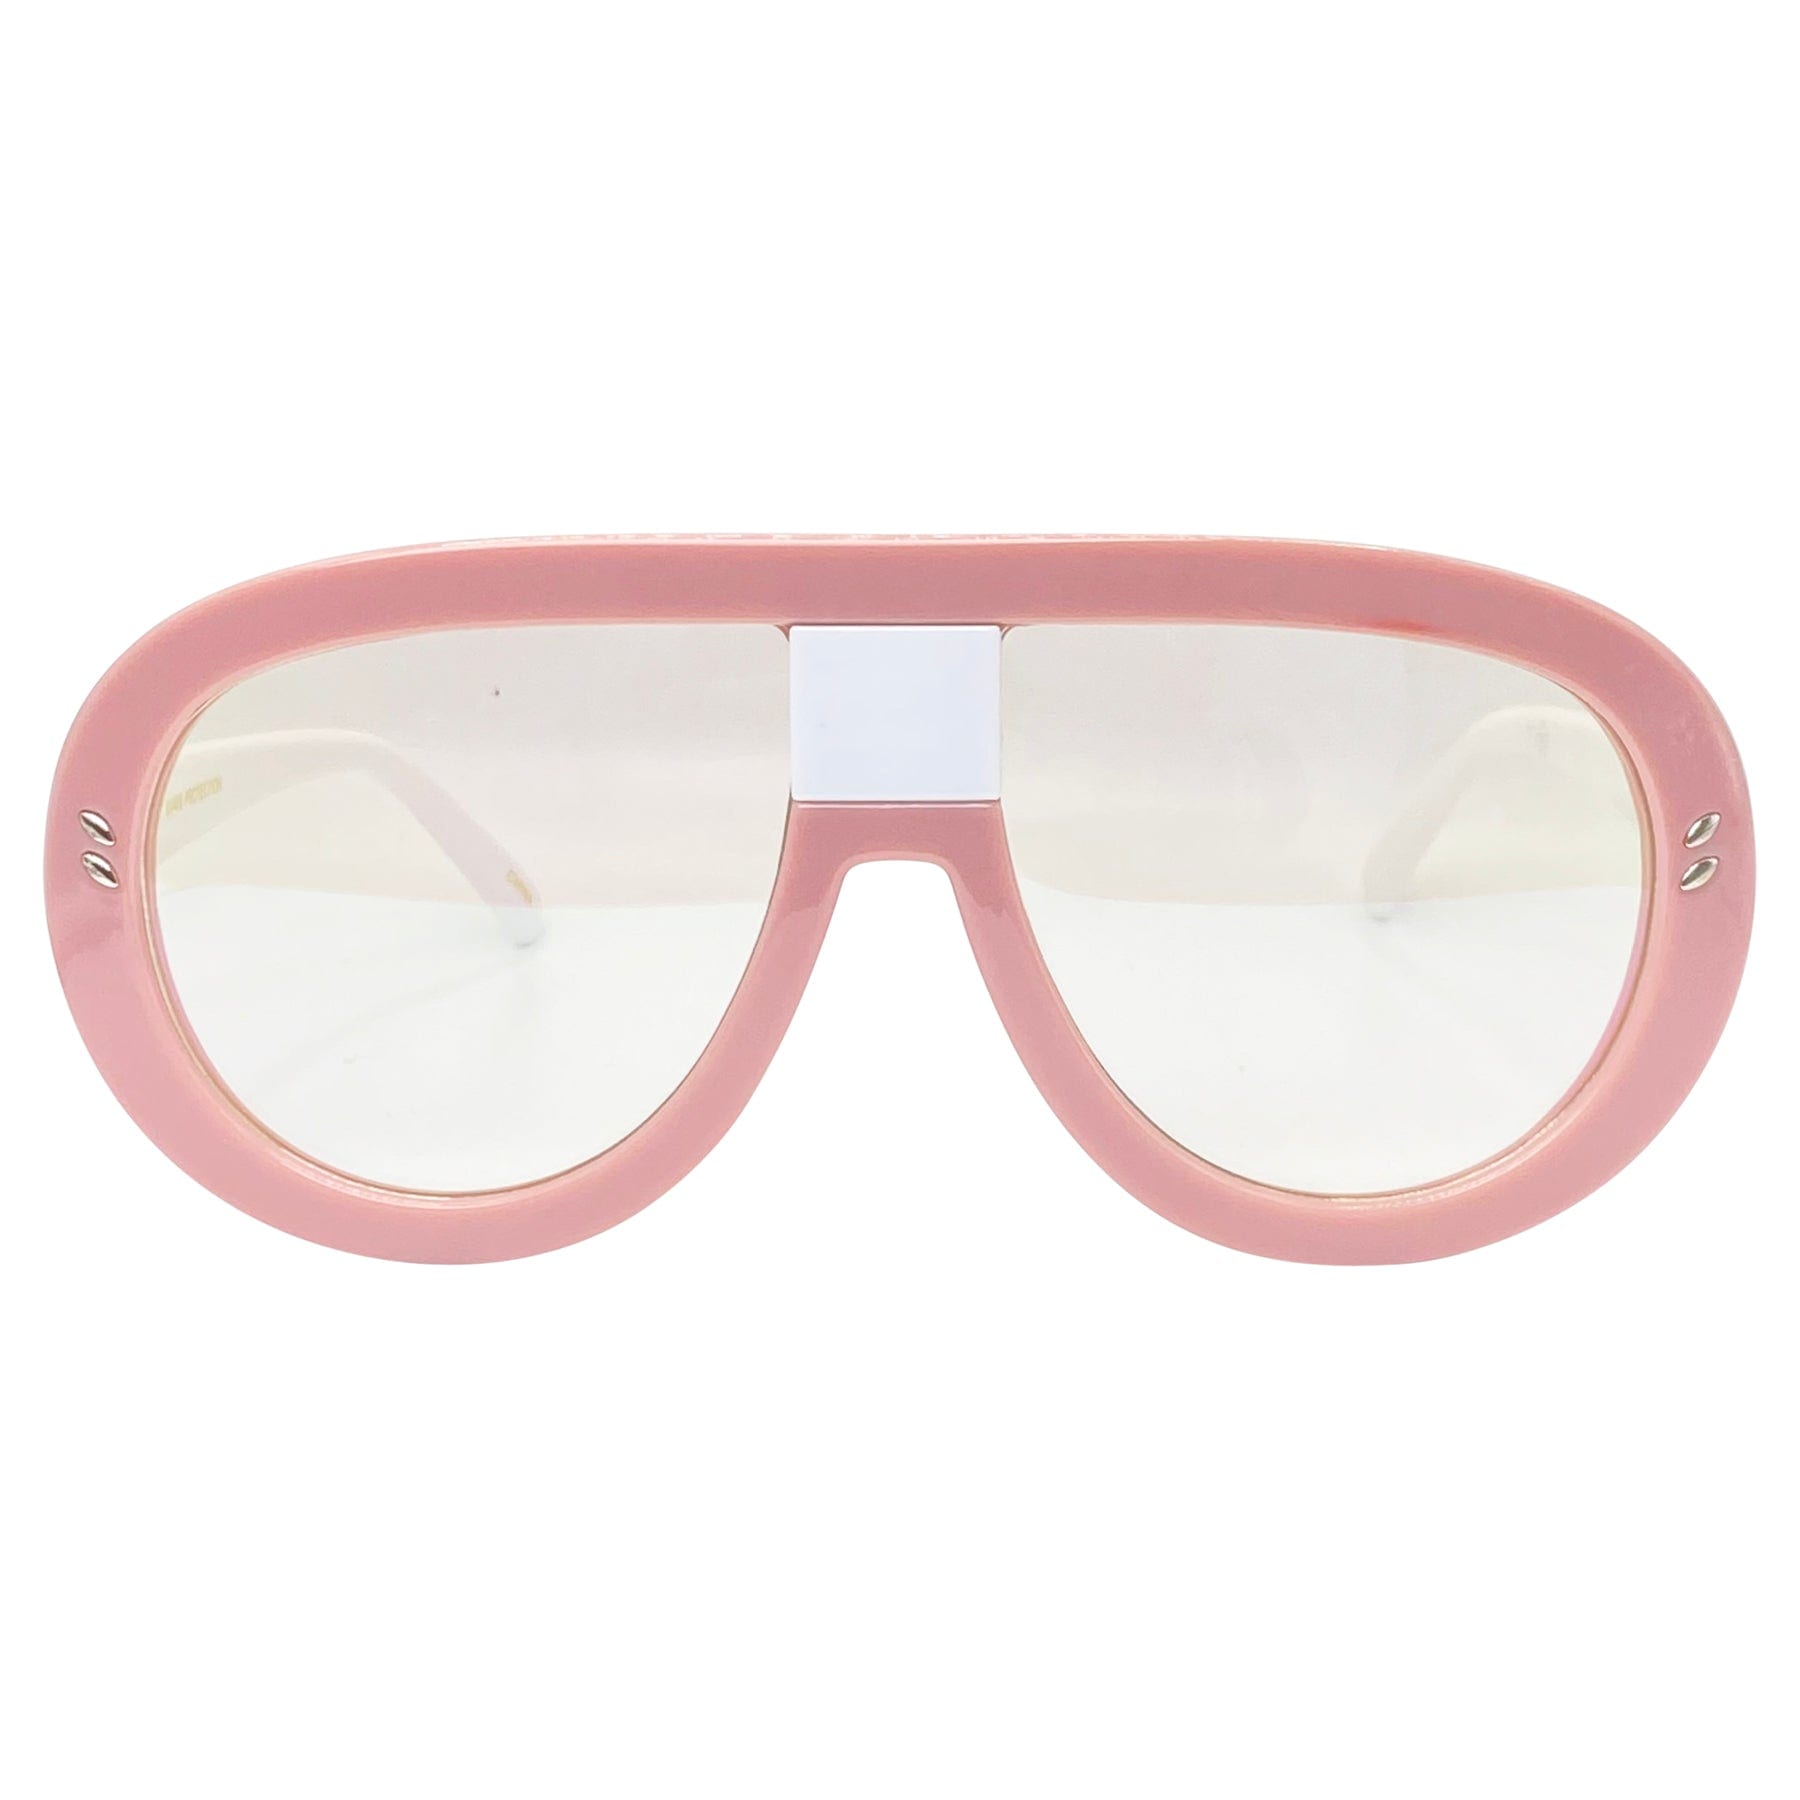 vintage inspired 70s glasses with a oversized chunky frame and clear iridescent lenses